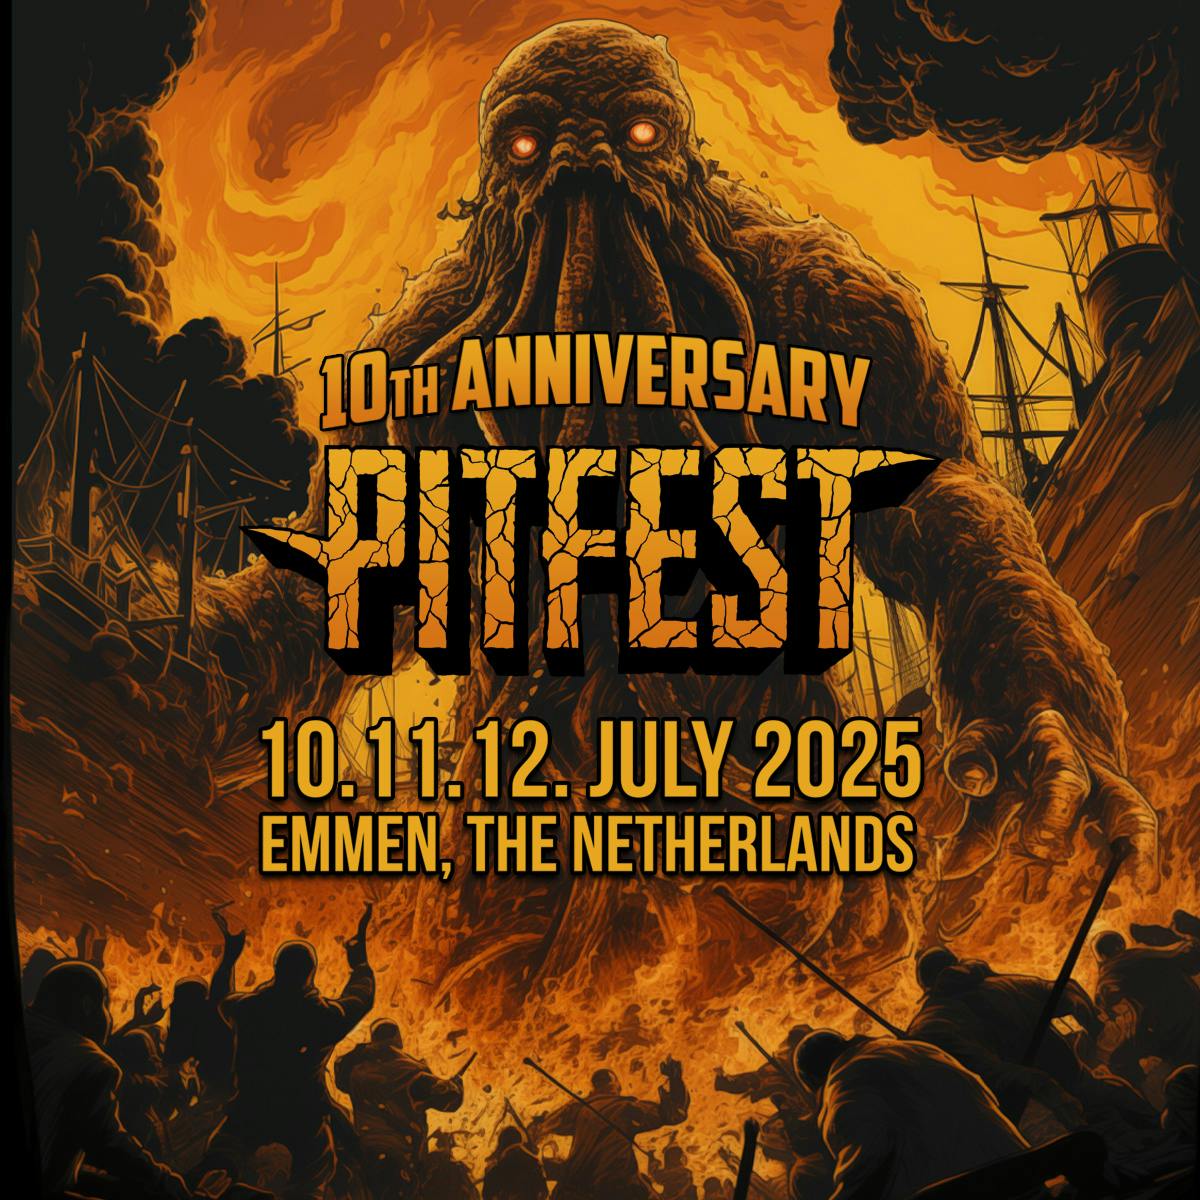 Pitfest 2025 tickets